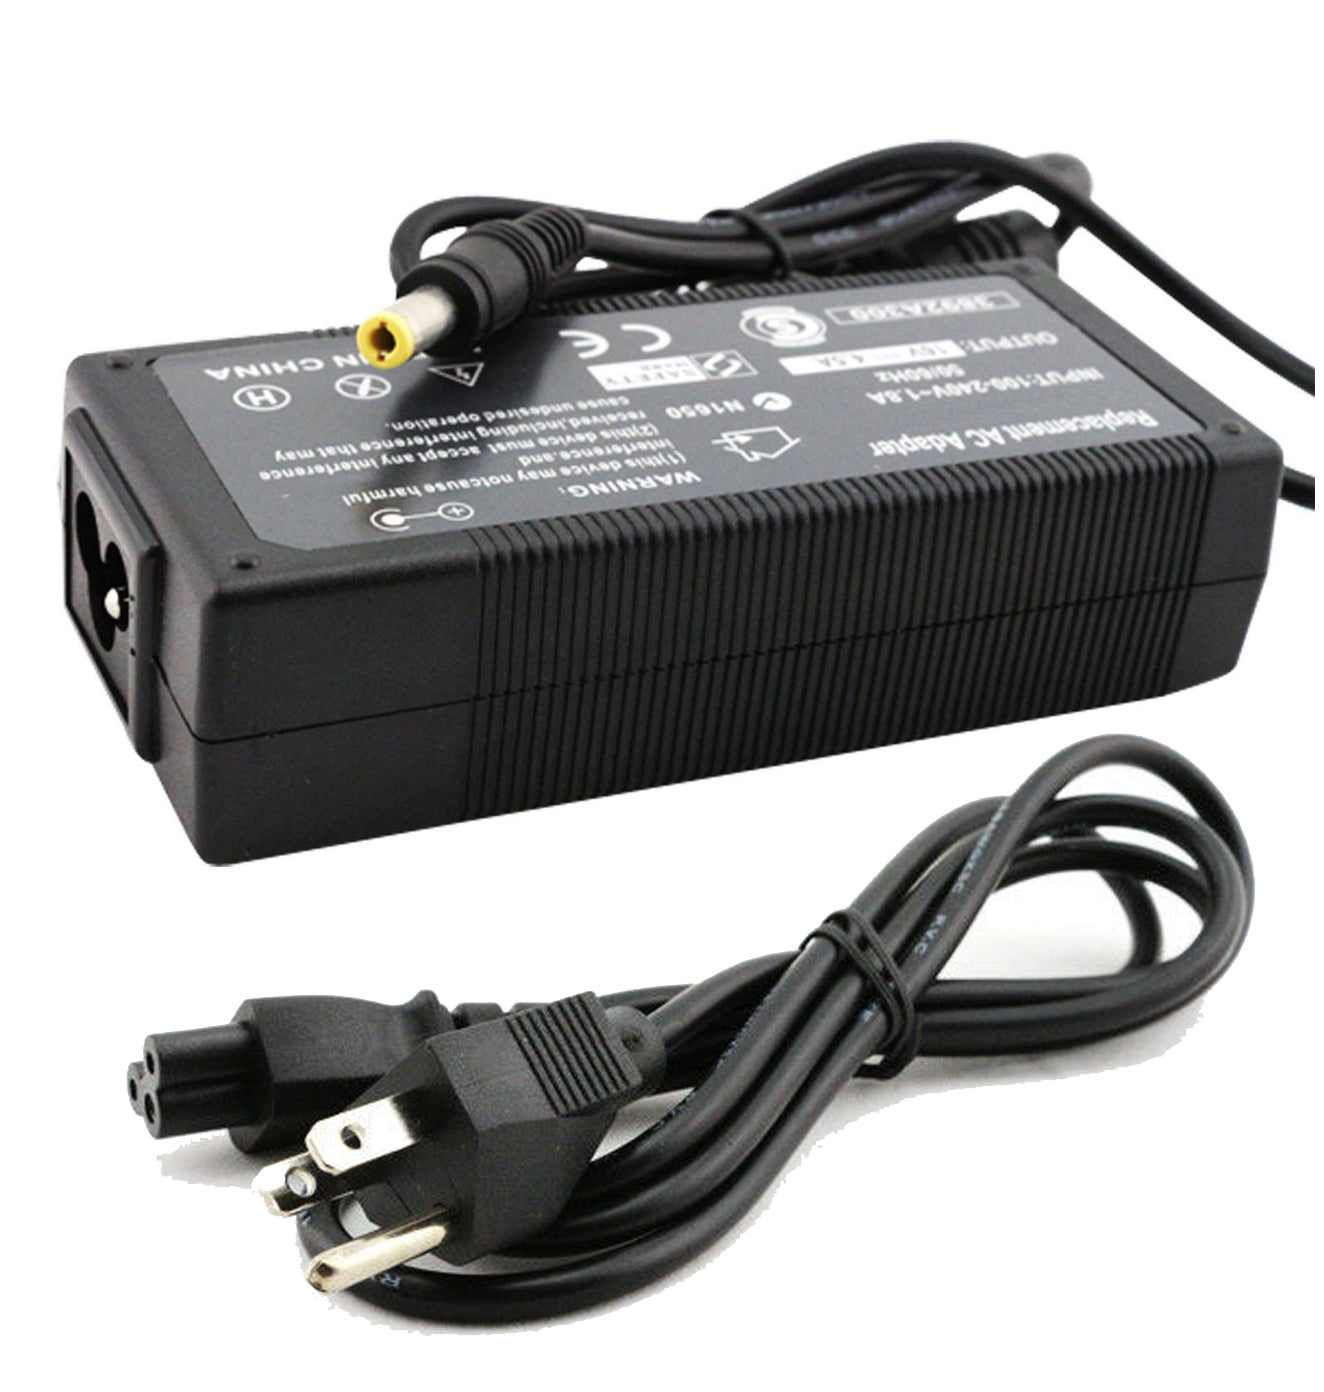 AC Adapter Charger for IBM ThinkPad X30 Notebook.